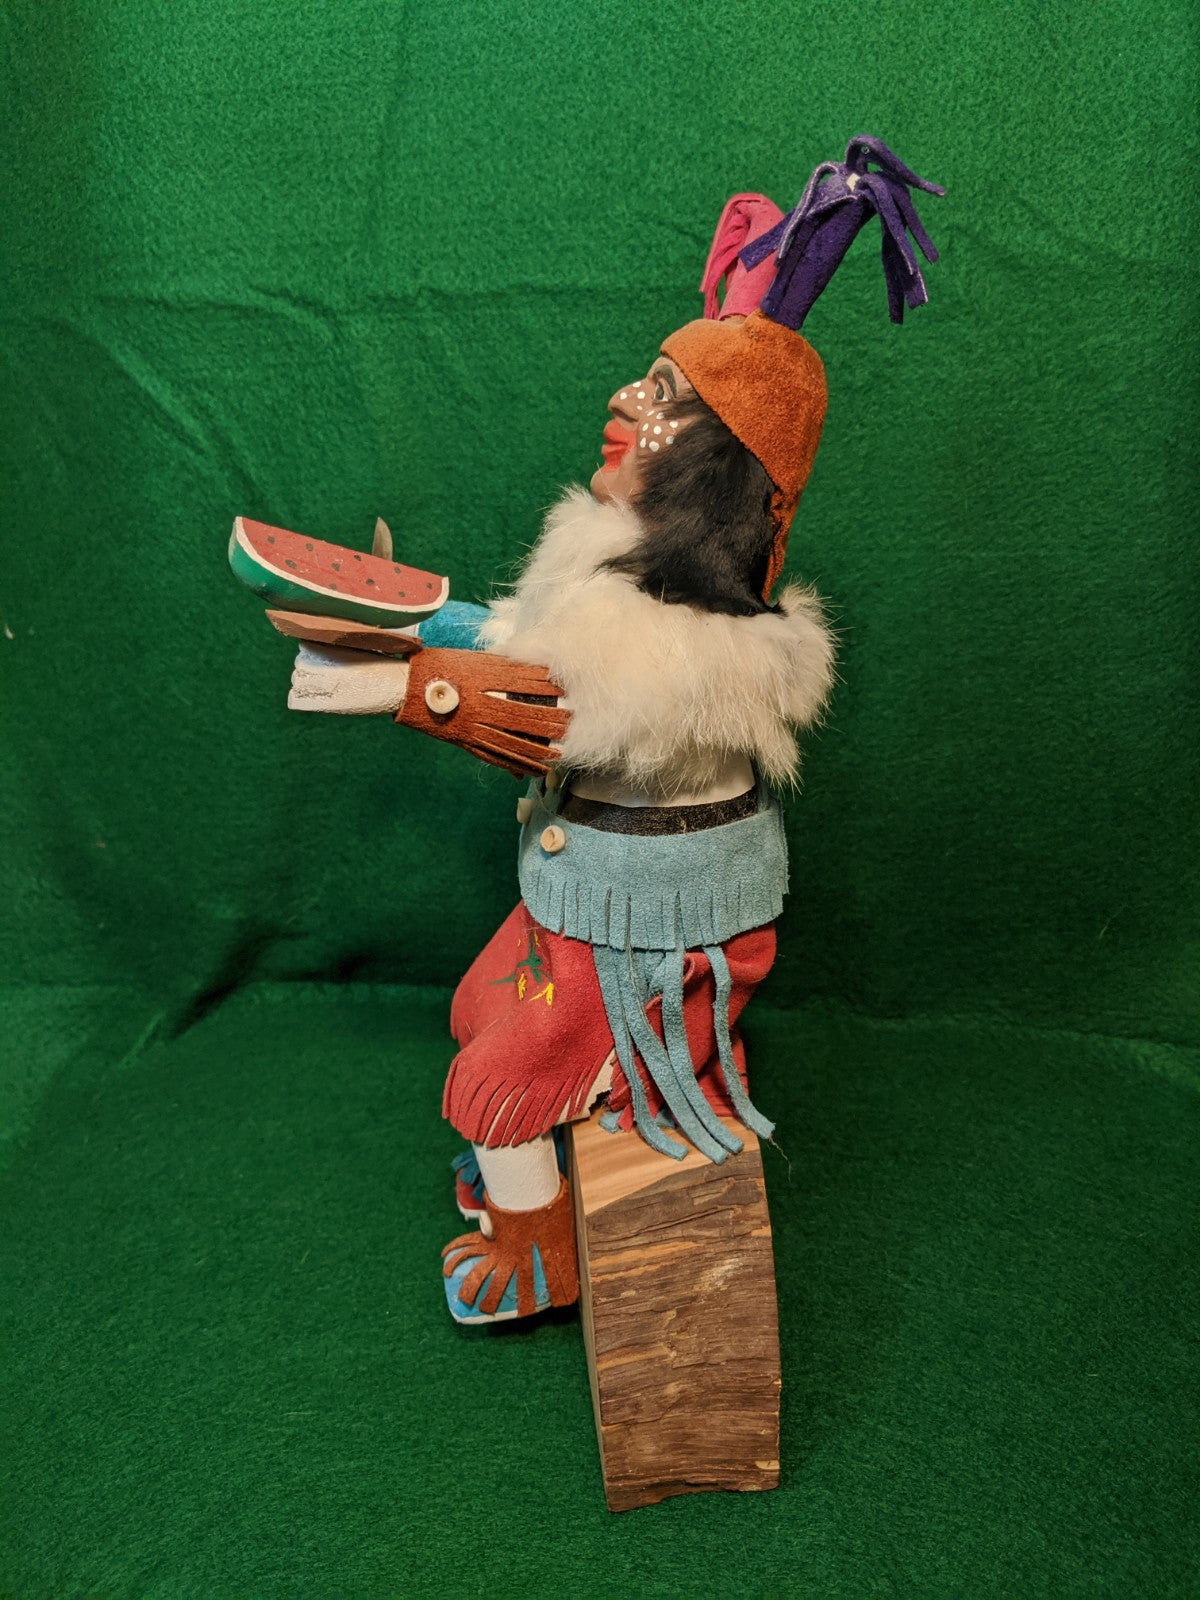 Native American Kachina figurine, The Clown, artist signed and numbered